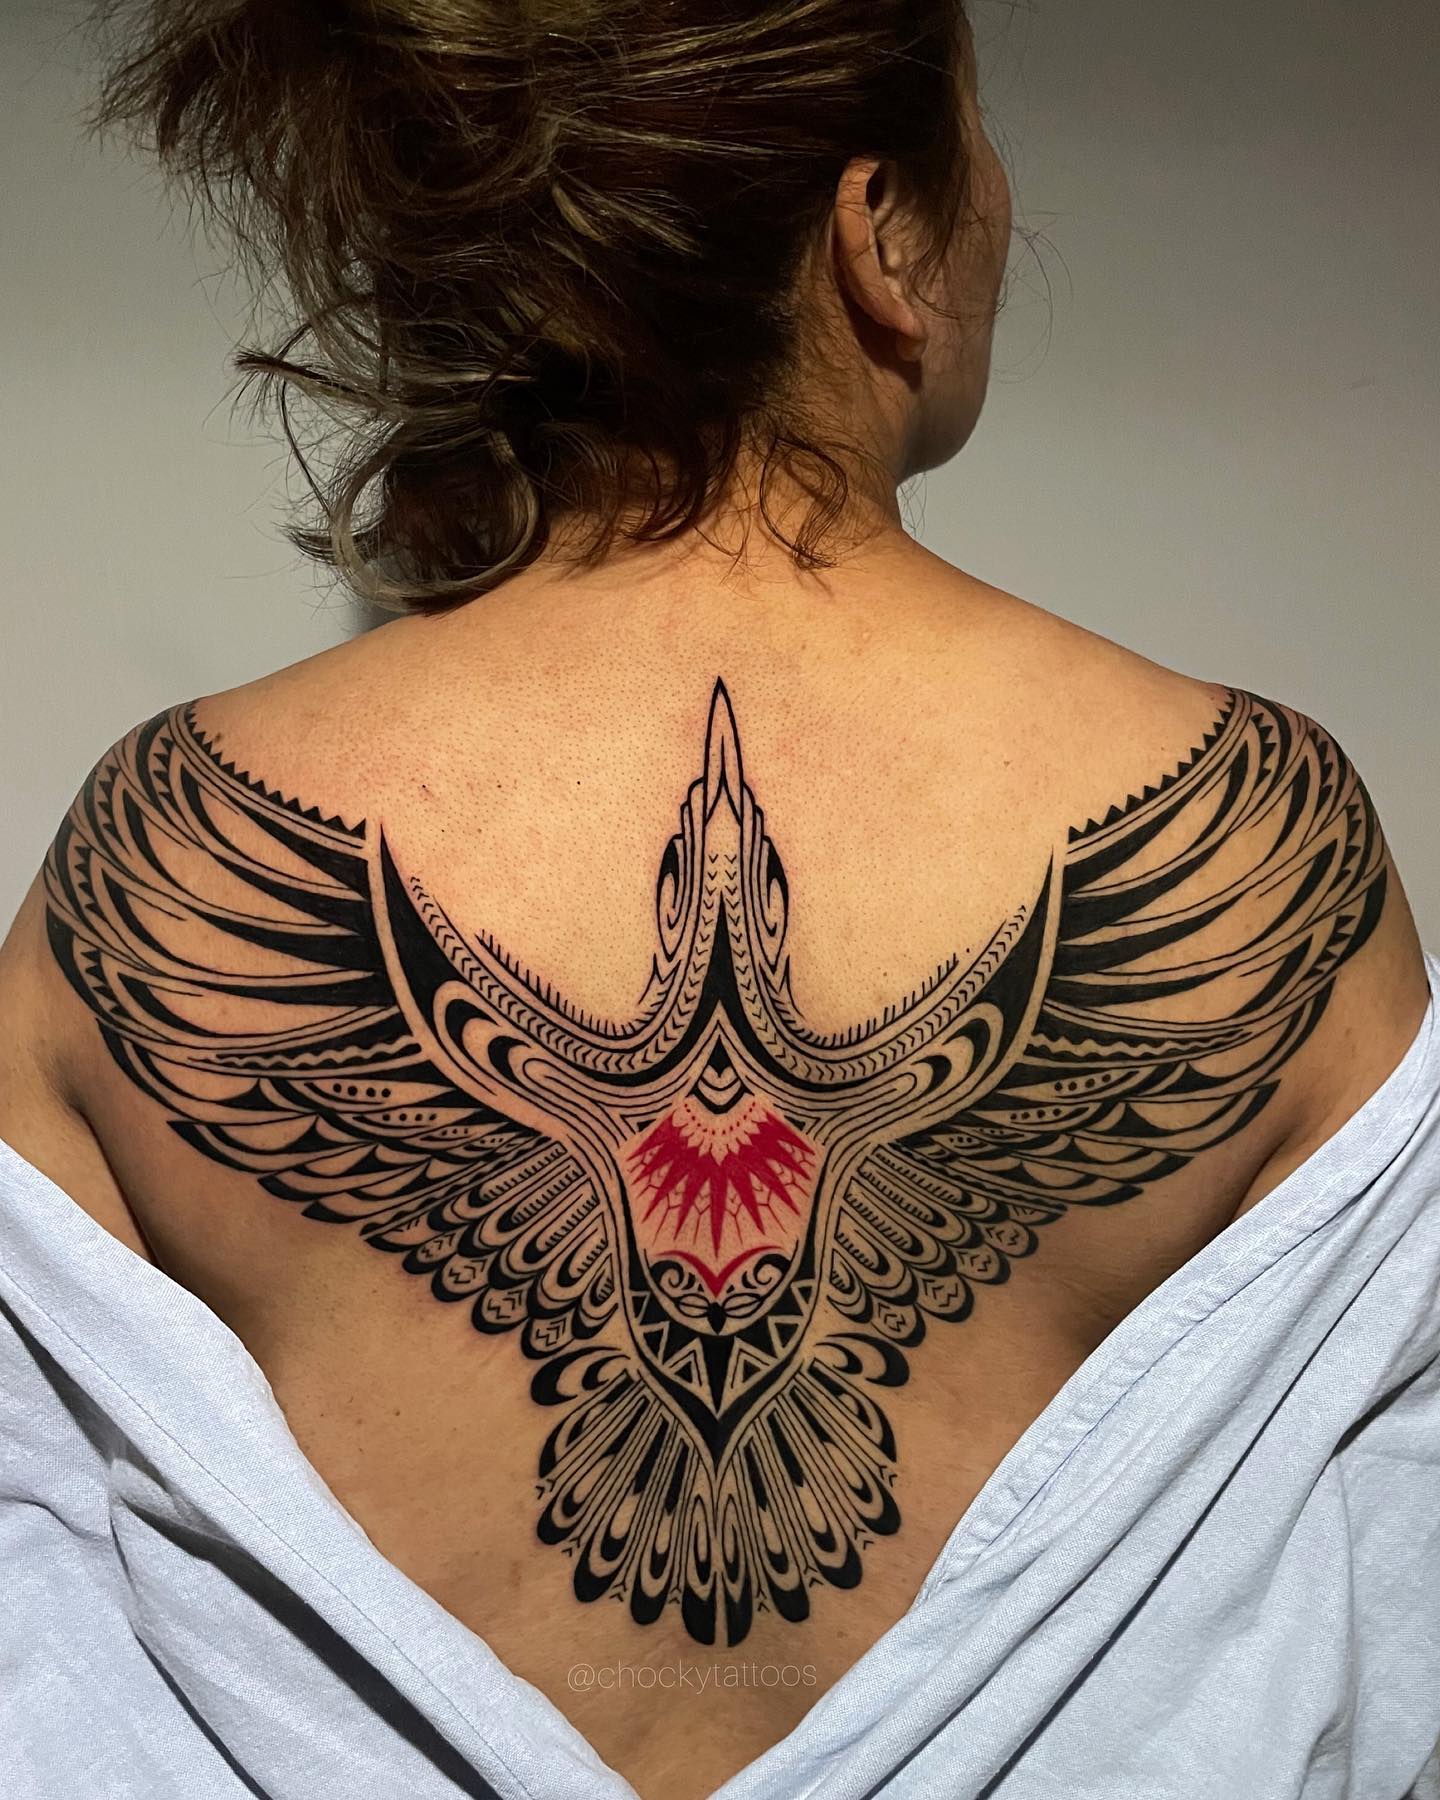 This giant back tattoo of a bird will symbolize your inner growth and your ability to overcome any situation in life.